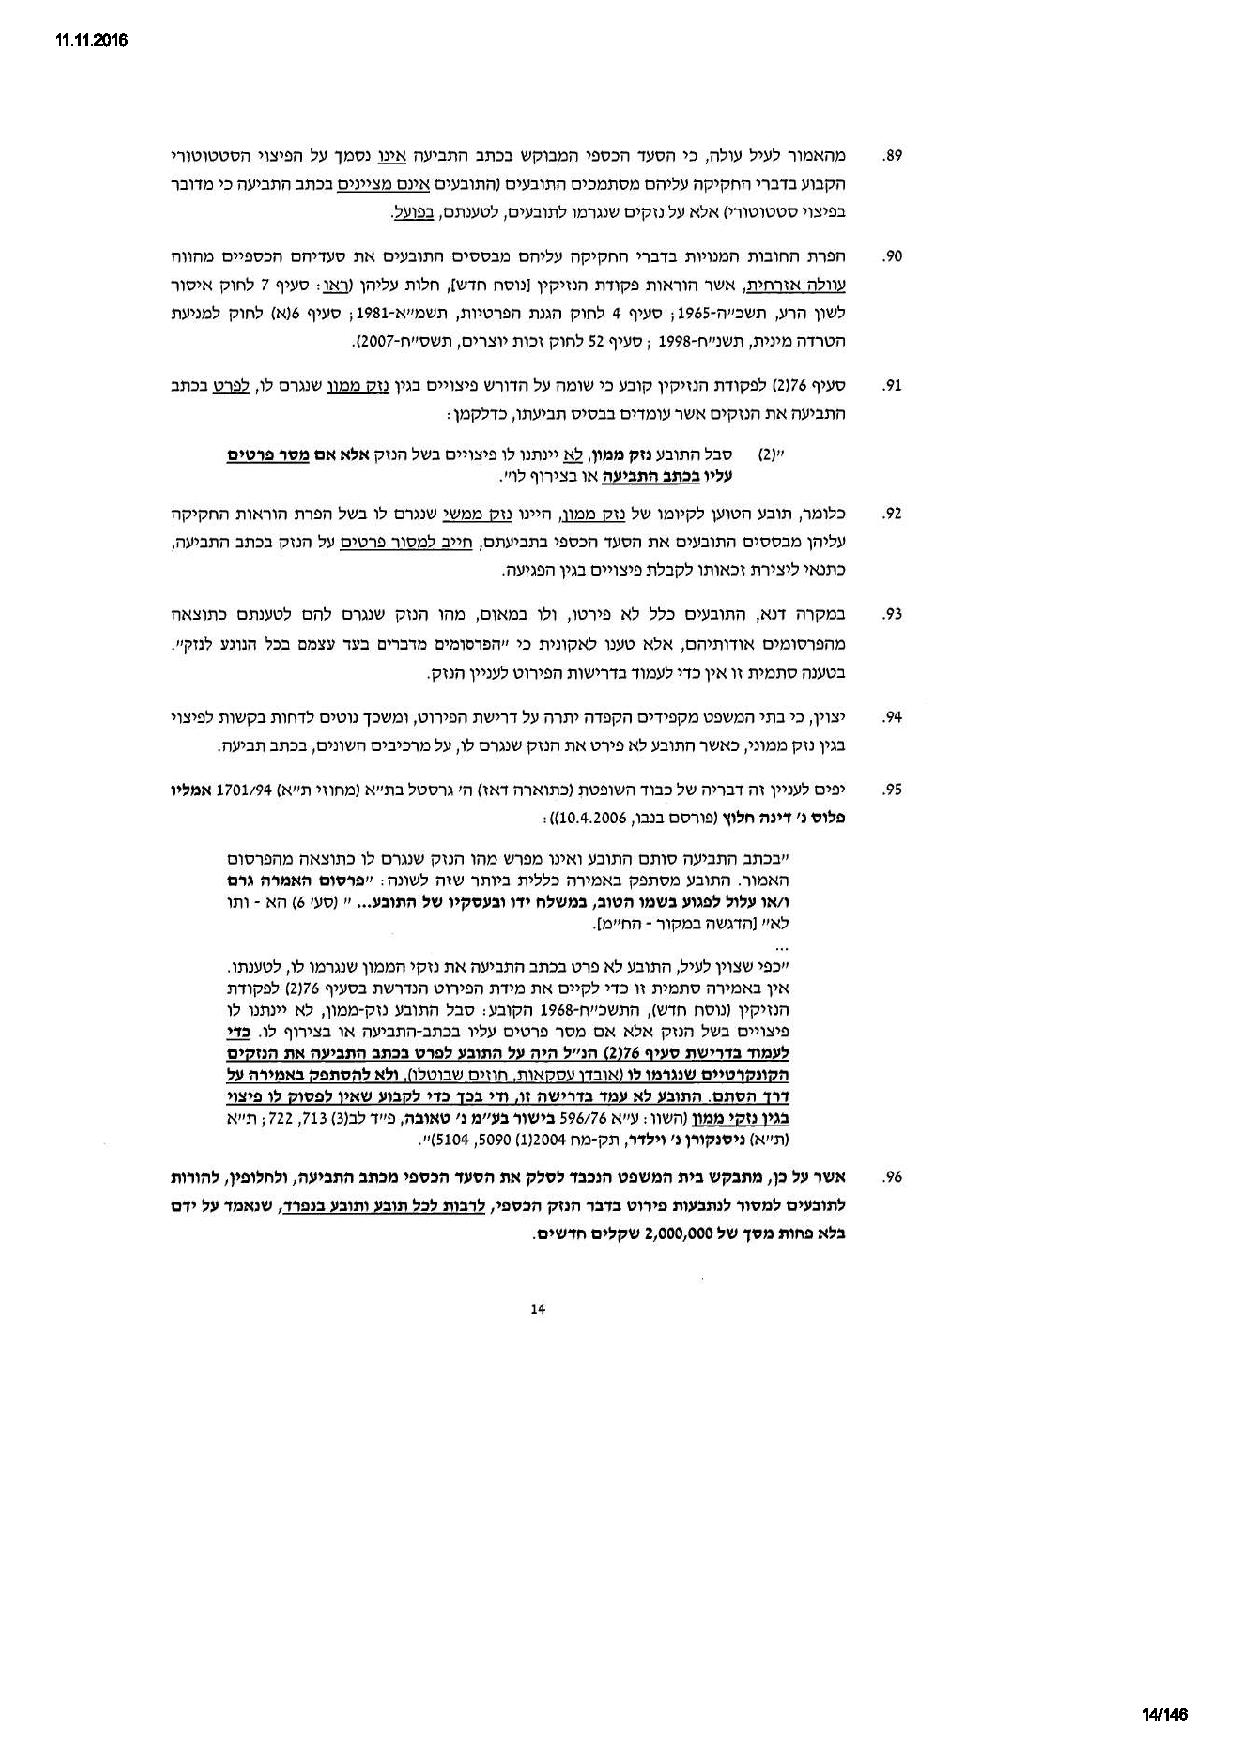 document-page-014